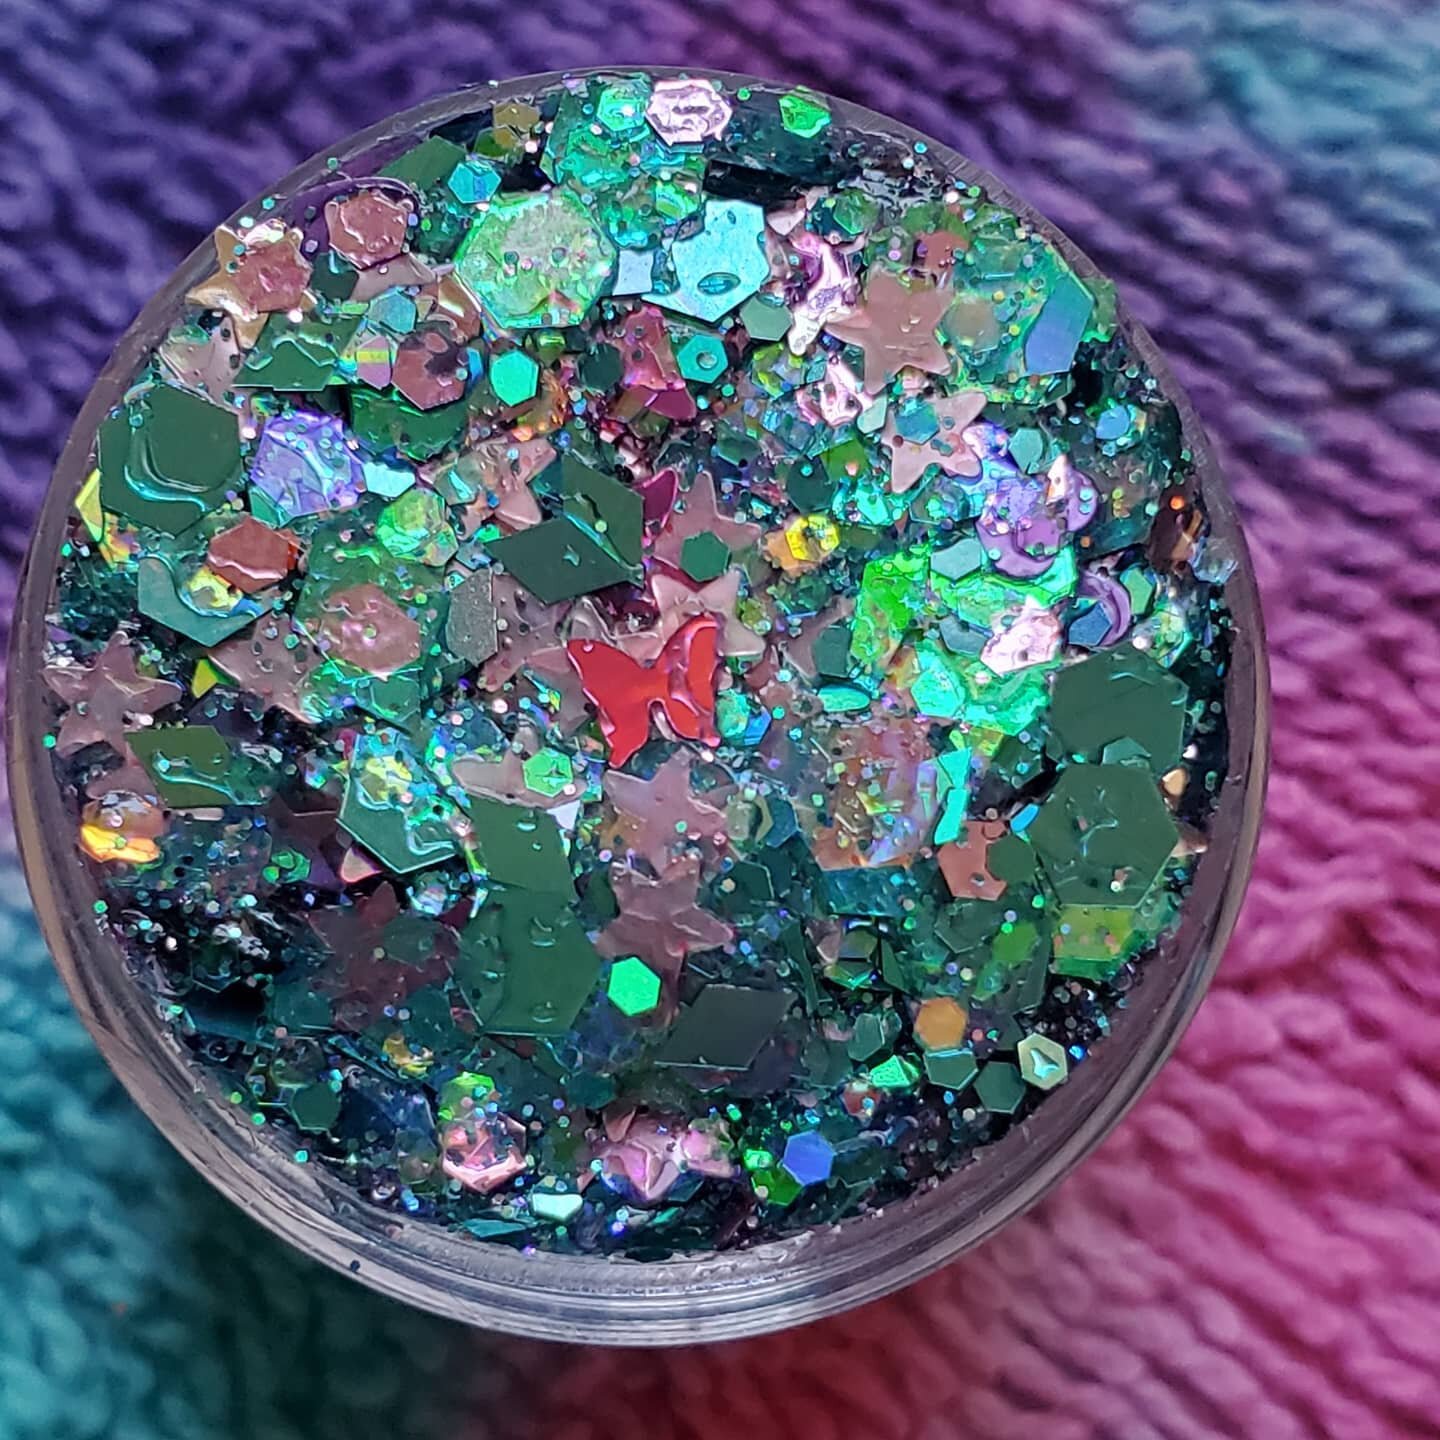 It's been far too long since I mixed a new thing! Putting the glitter back in Glitter Bee with this summery blend. 

Introducing 🧜&zwj;♀️ Mermaid Kisses 💋 

Sheer-idescent teal and blues with pink stars, butterflies, purple hearts, and holographic 